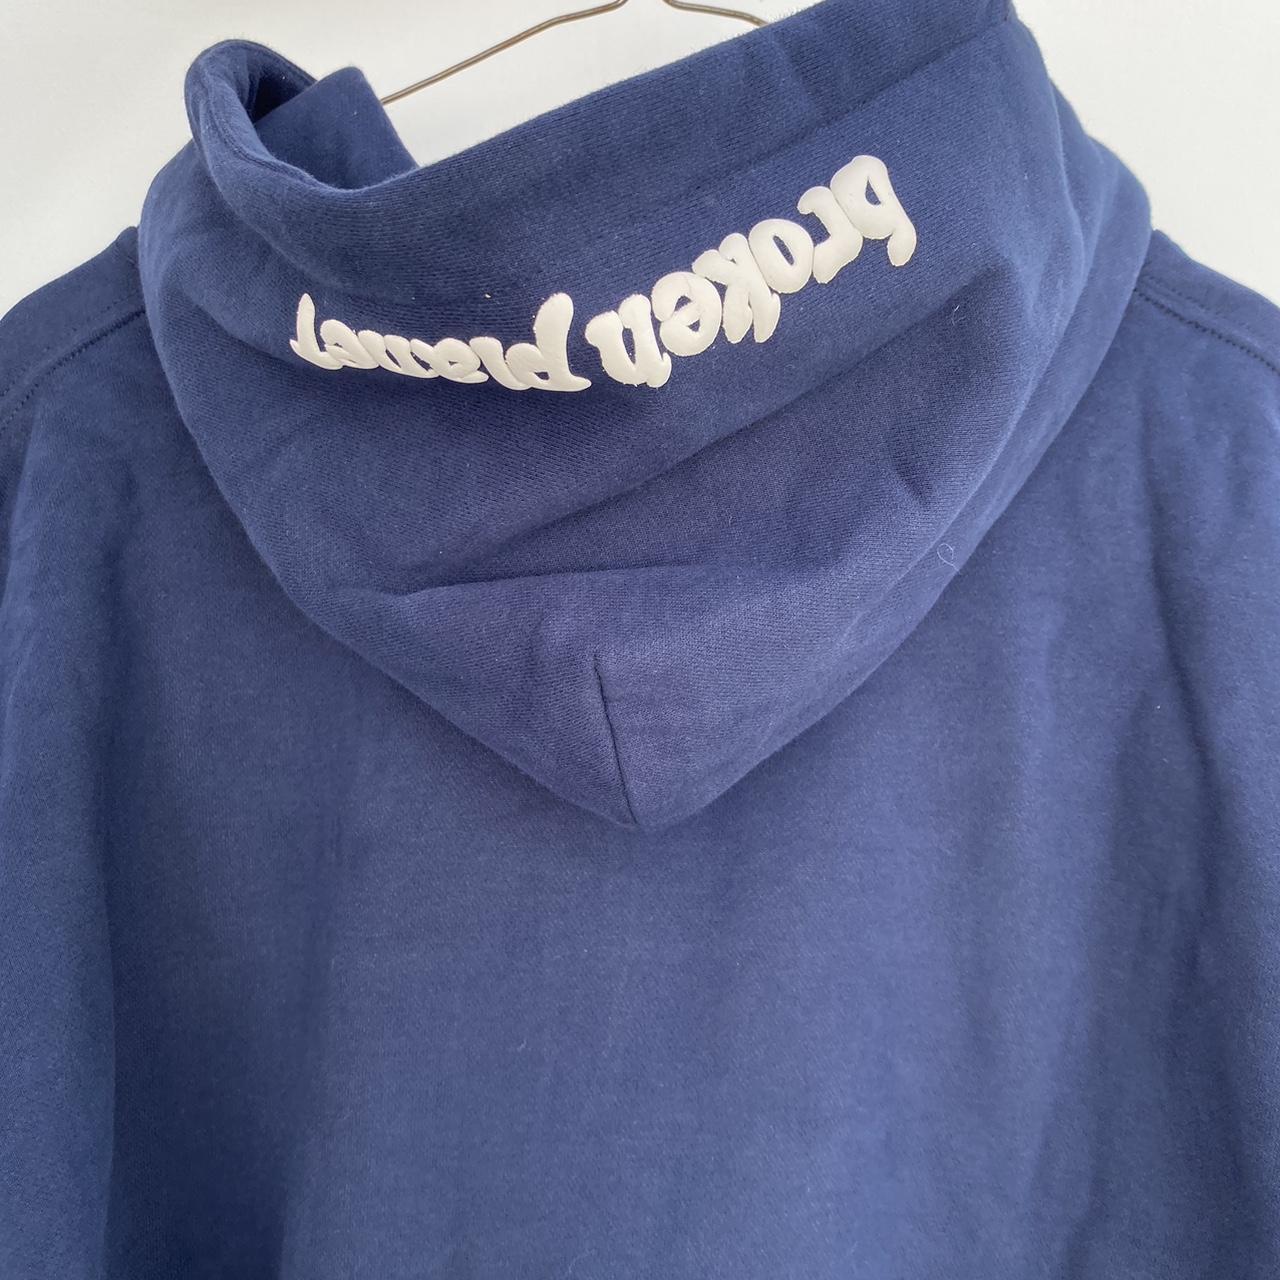 Broken planet ‘into the abyss’ hoodie Blue Size... - Depop